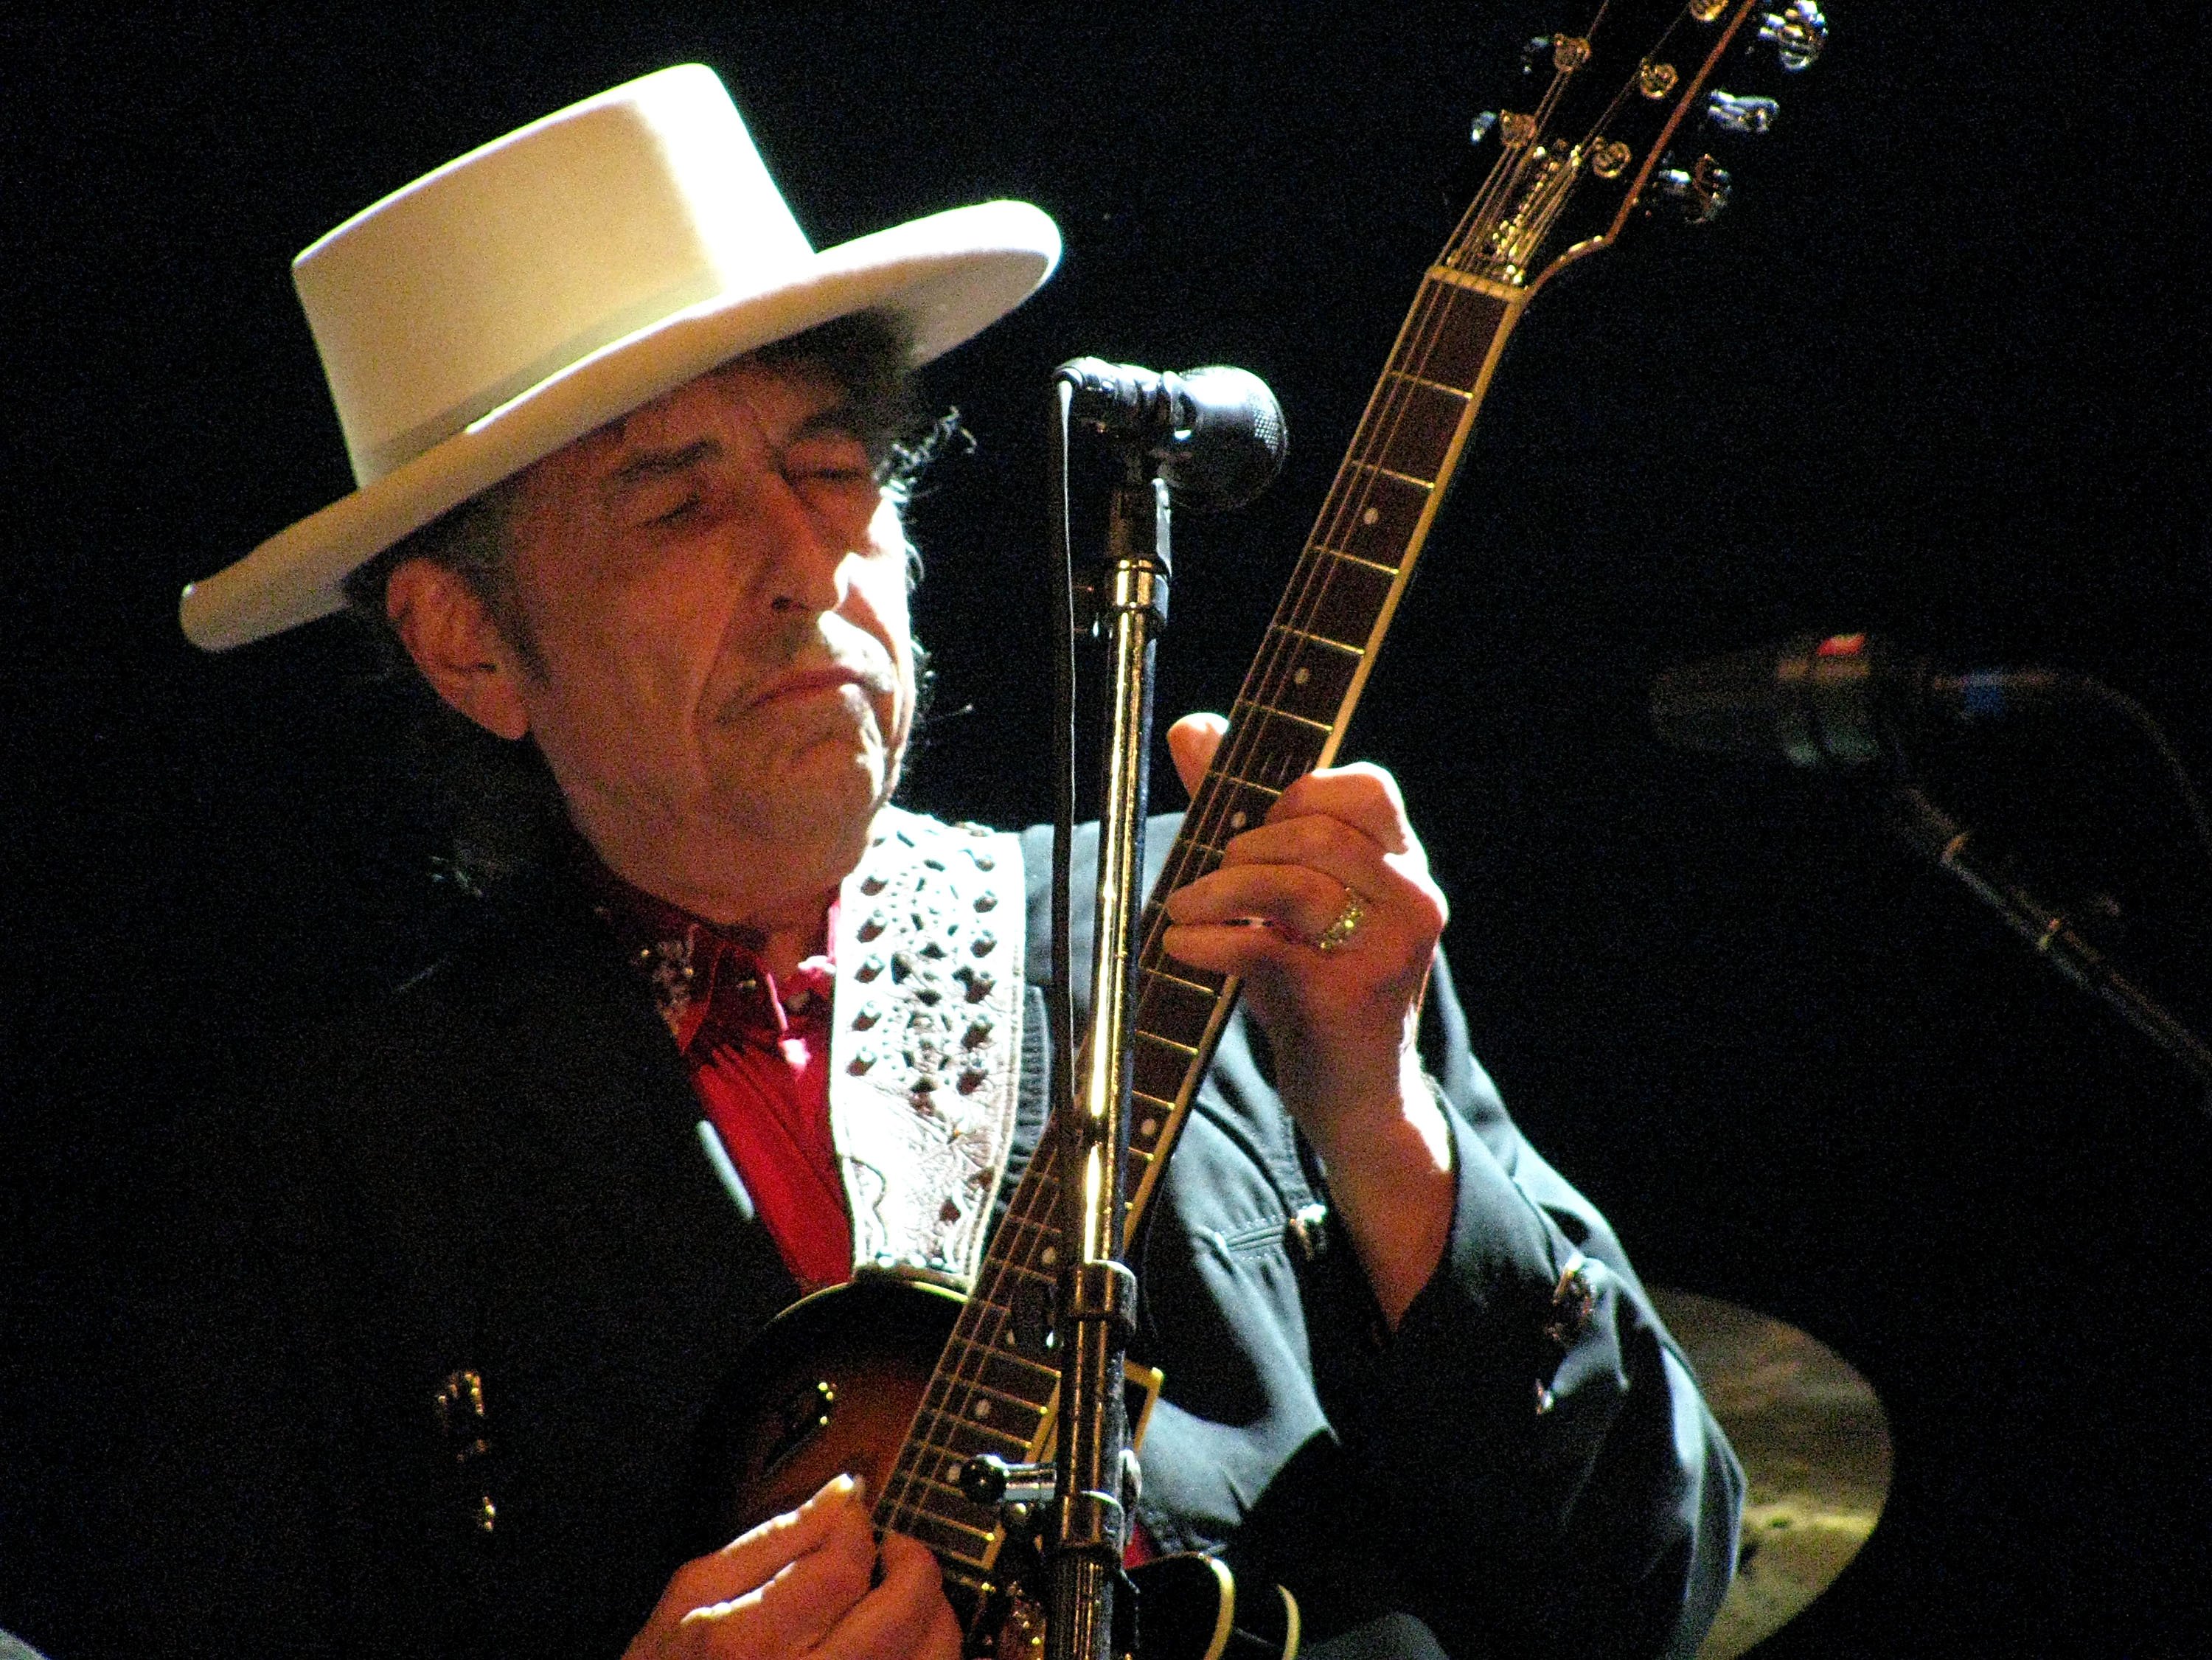 Bob Dylan wears a hat and plays the guitar in front of a microphone.